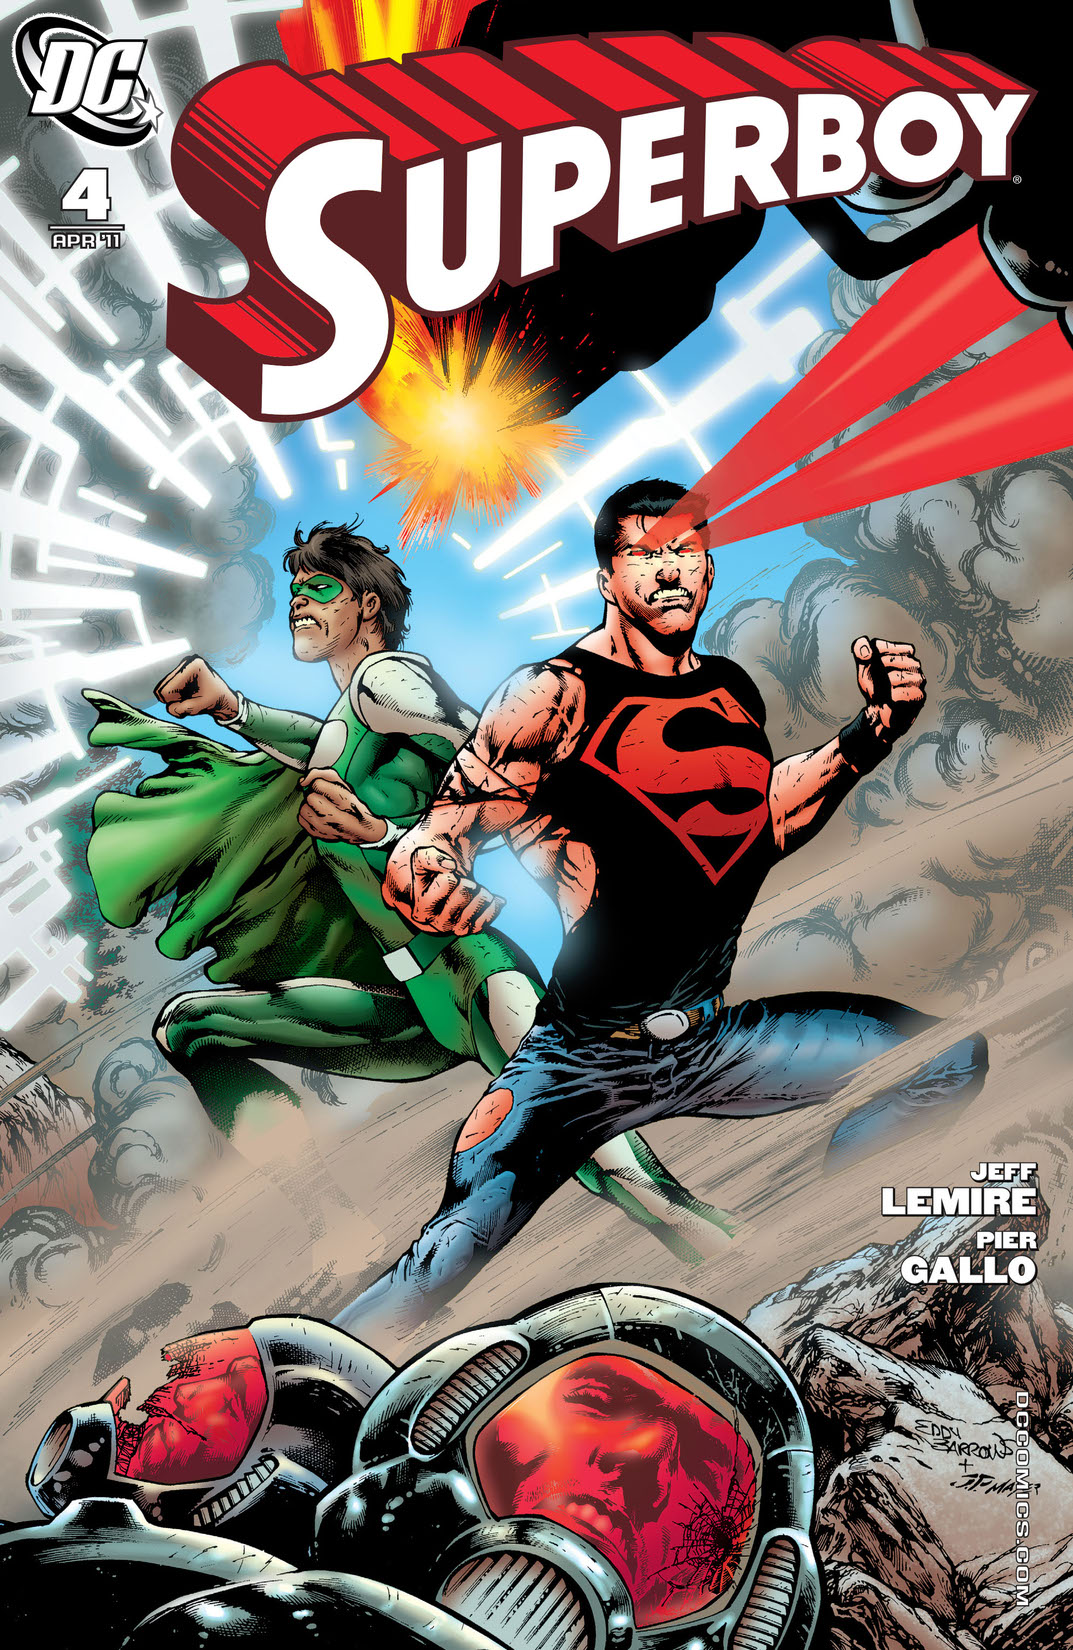 Superboy (2010-) #4 preview images